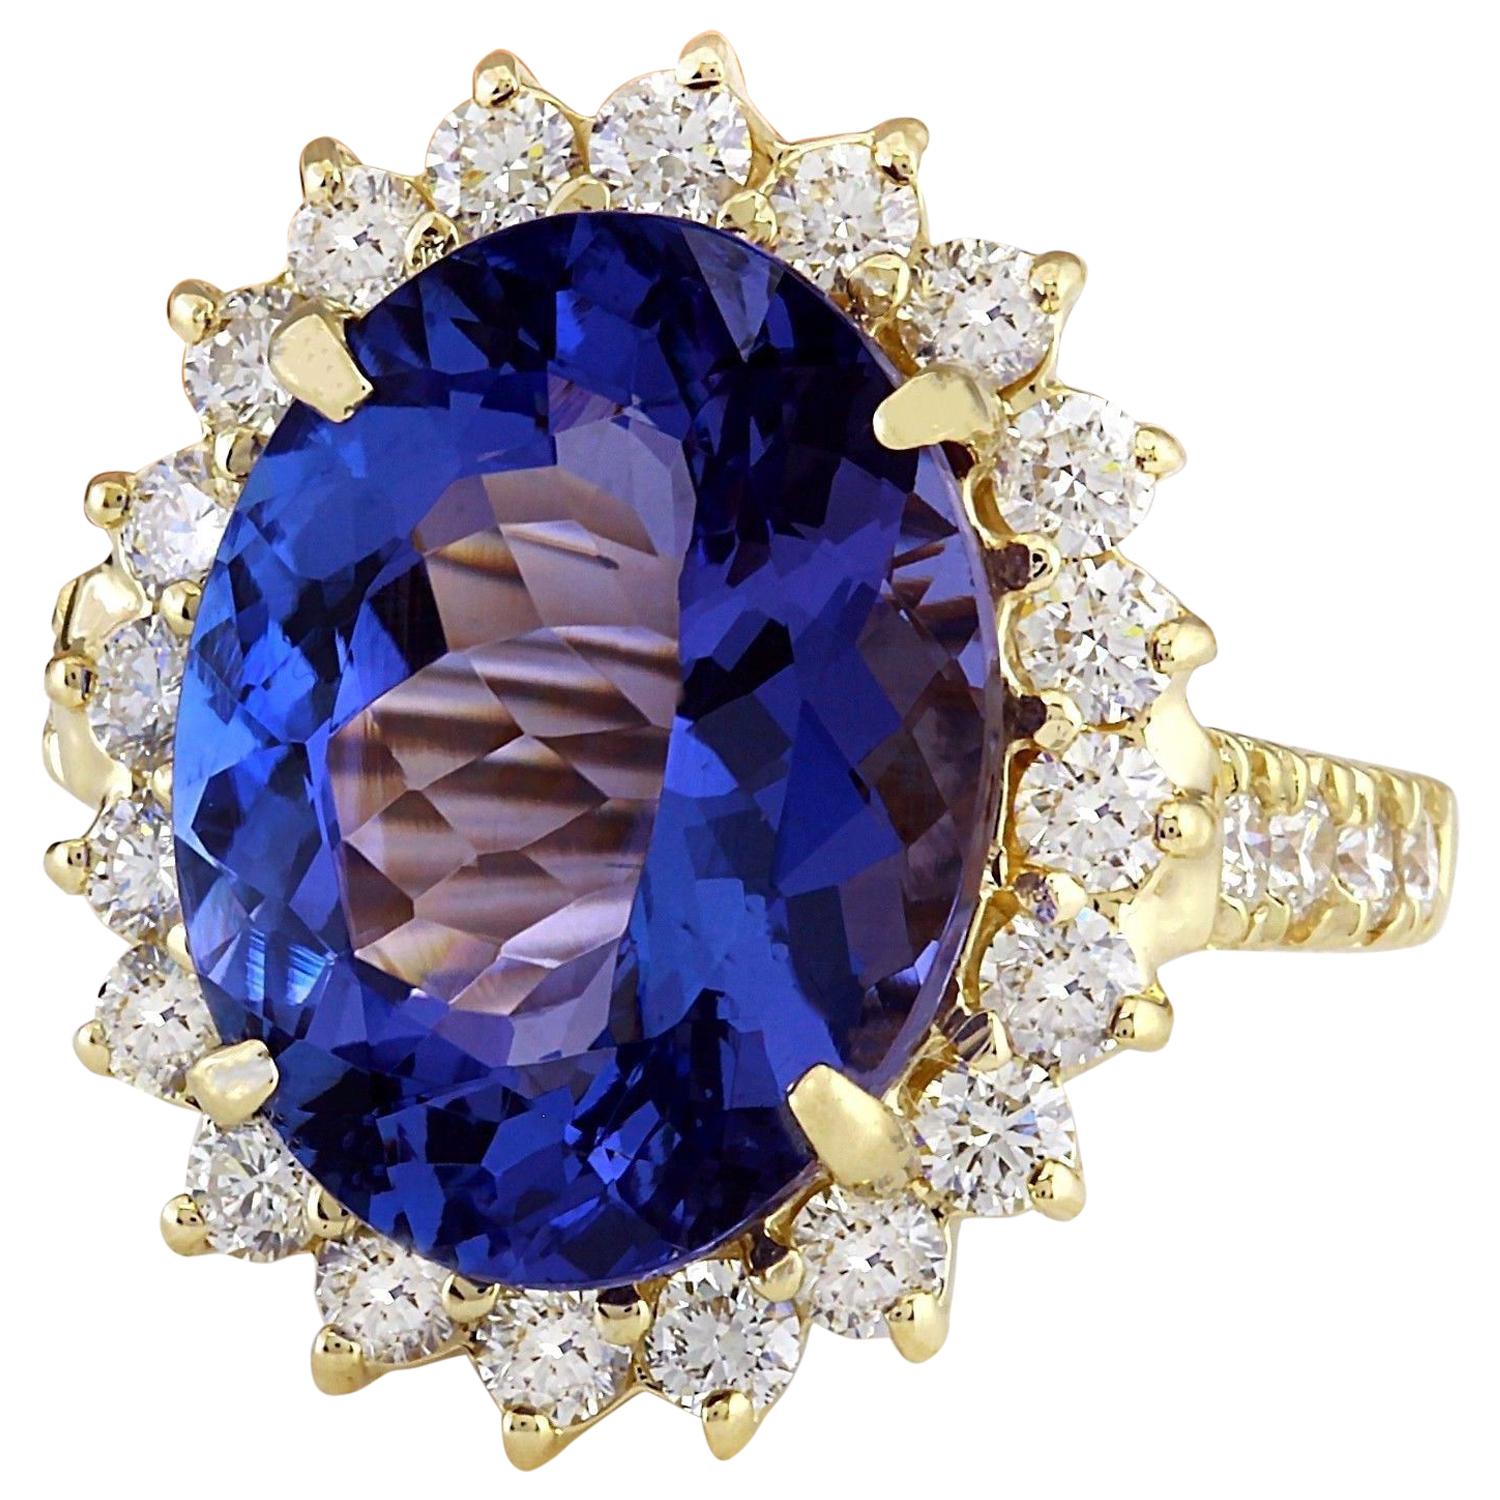 Elevate your style with this stunning Tanzanite Diamond Cocktail Ring crafted in 14K Solid Yellow Gold. Featuring a captivating 8.73 carat Tanzanite stone measuring 14.00x10.00 mm, surrounded by sparkling diamonds totaling 1.35 carats. With a face